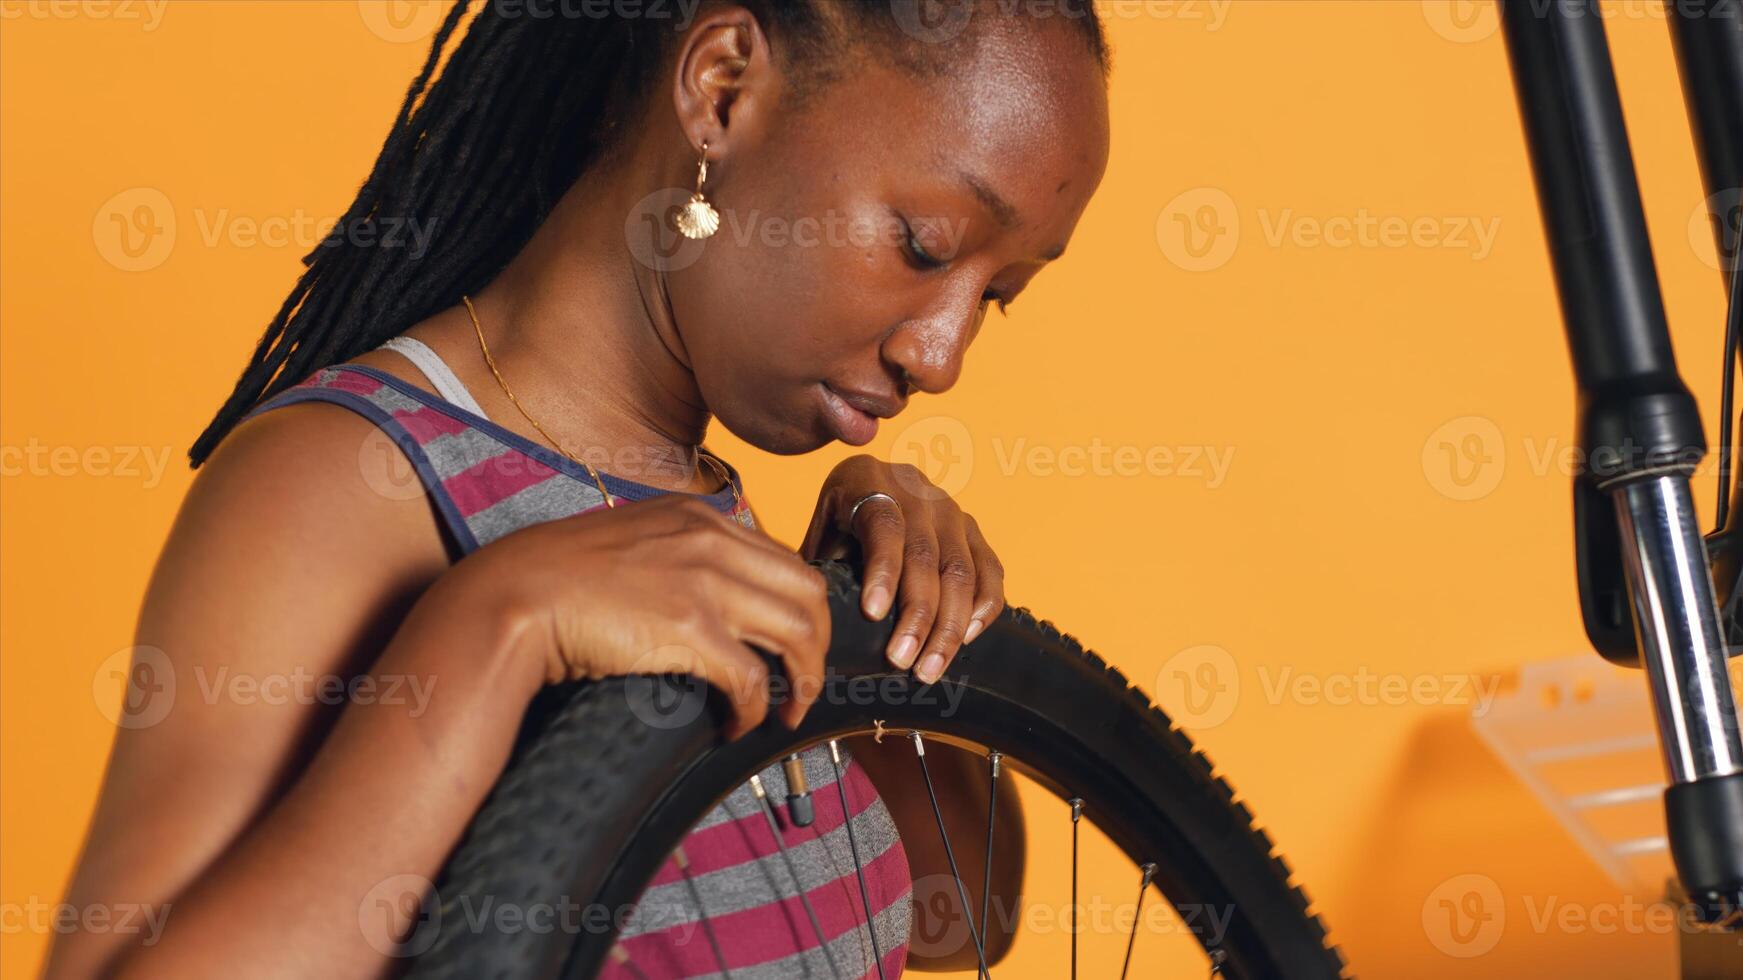 Skilled expert detaching bicycle wheel and adjusting handlebar in studio background repair shop. Close up shot of engineer disassembling bike tire, repairing components with professional equipment photo